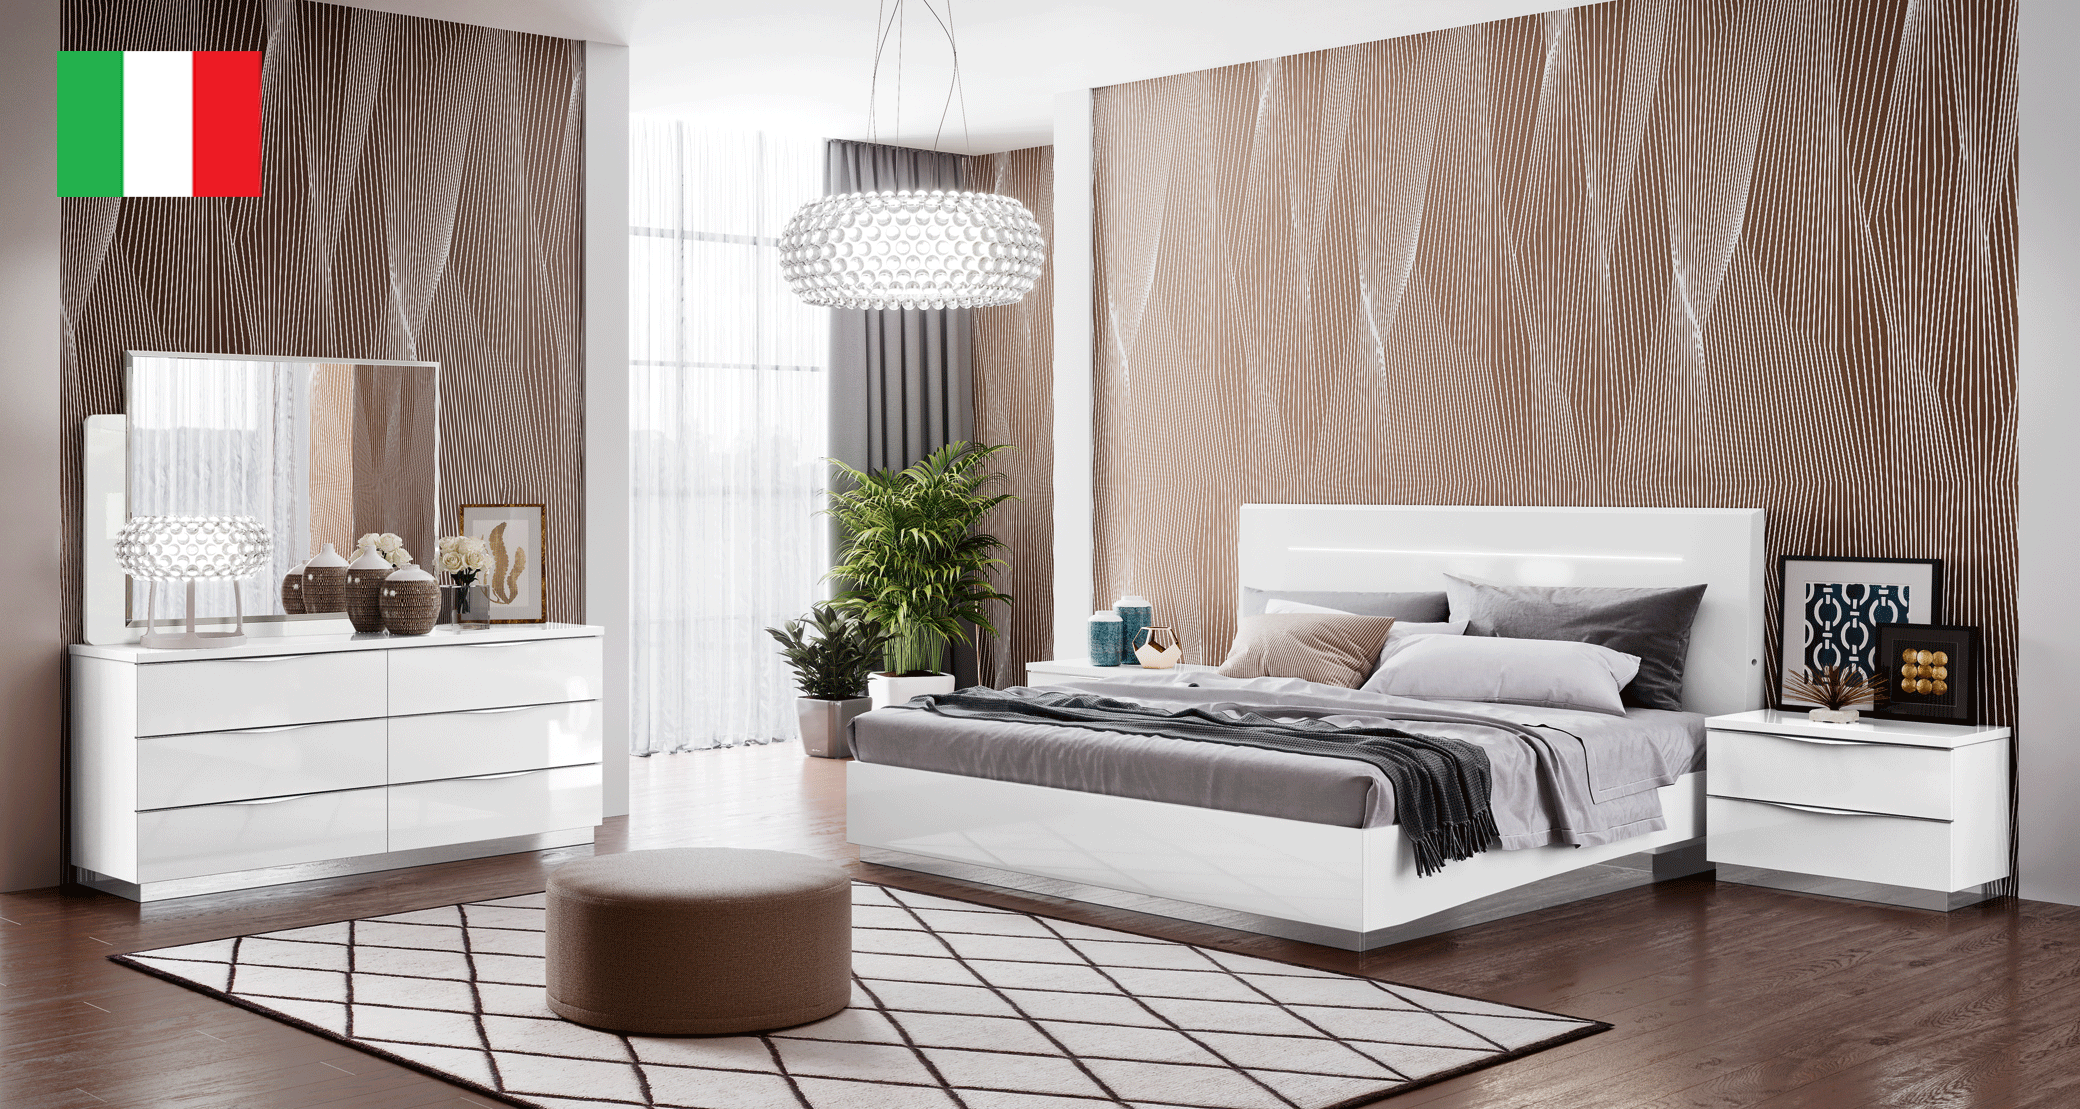 Brands Camel Classic Collection, Italy Onda LEGNO White Bedroom